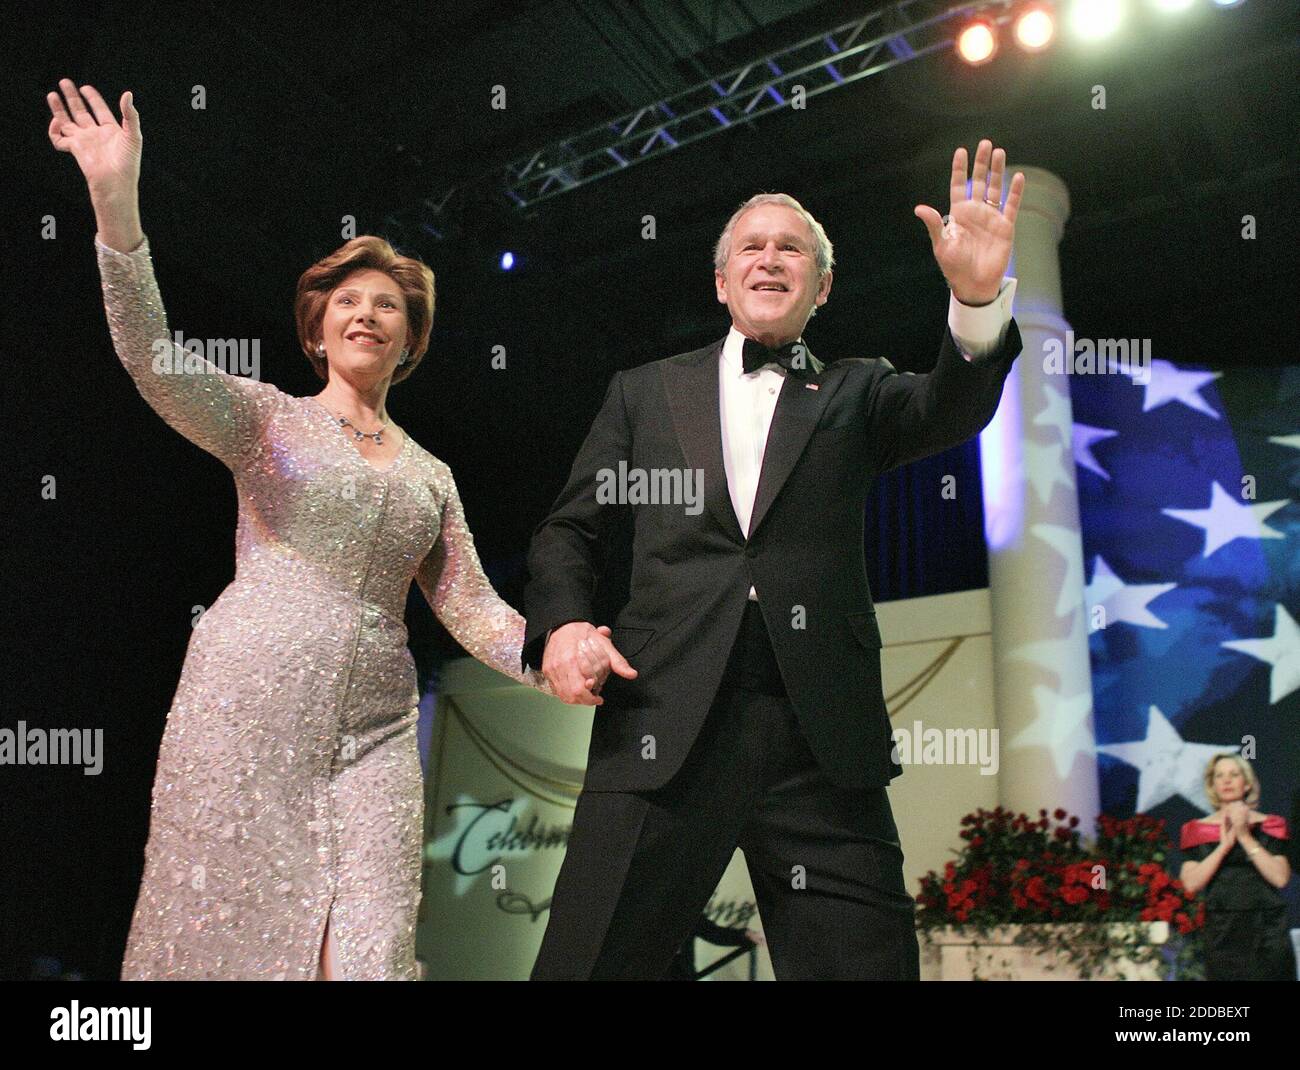 NO FILM, NO VIDEO, NO TV, NO DOCUMENTARY - President George W. Bush and first lady Laura Bush wave to the crowd at the Independence Ball, part of the inauguration festivities in Washington, DC, USA, on January 20, 2005. Photo by Chuck Kennedy/US News Story Slugged/KRT/ABACA. Stock Photo